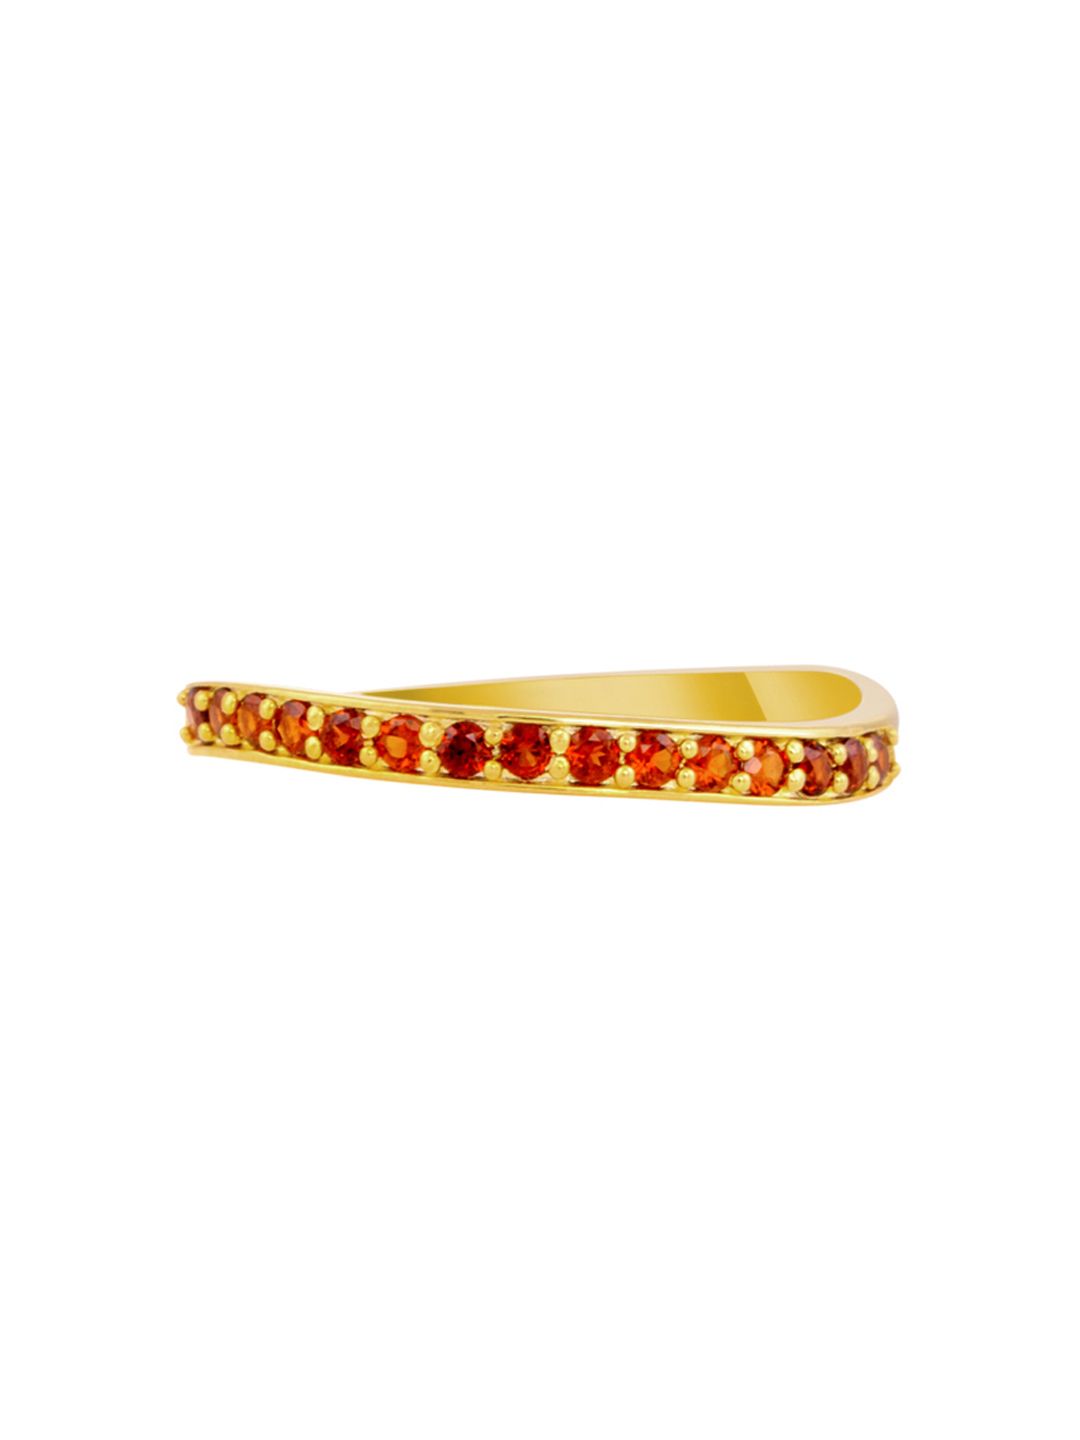 TALISMAN Women Gold-Plated & Red Garnet-Studded Handcrafted Ring Price in India